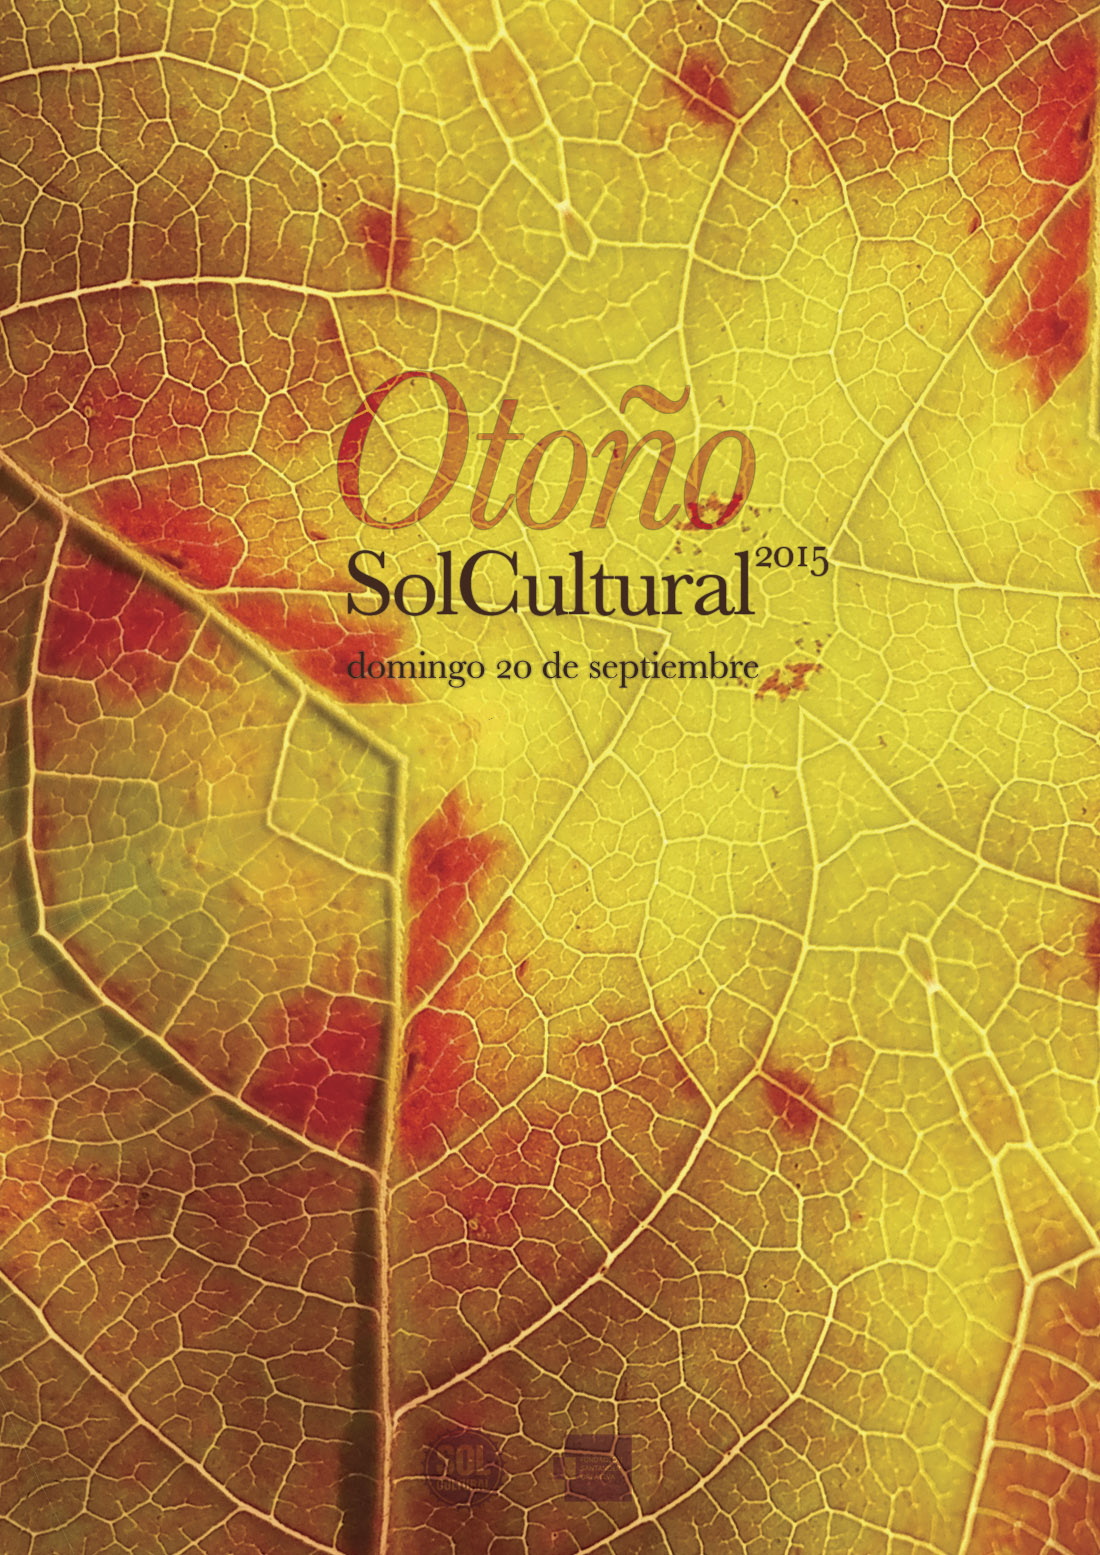 2015 - otoño Solcultural - Beusual